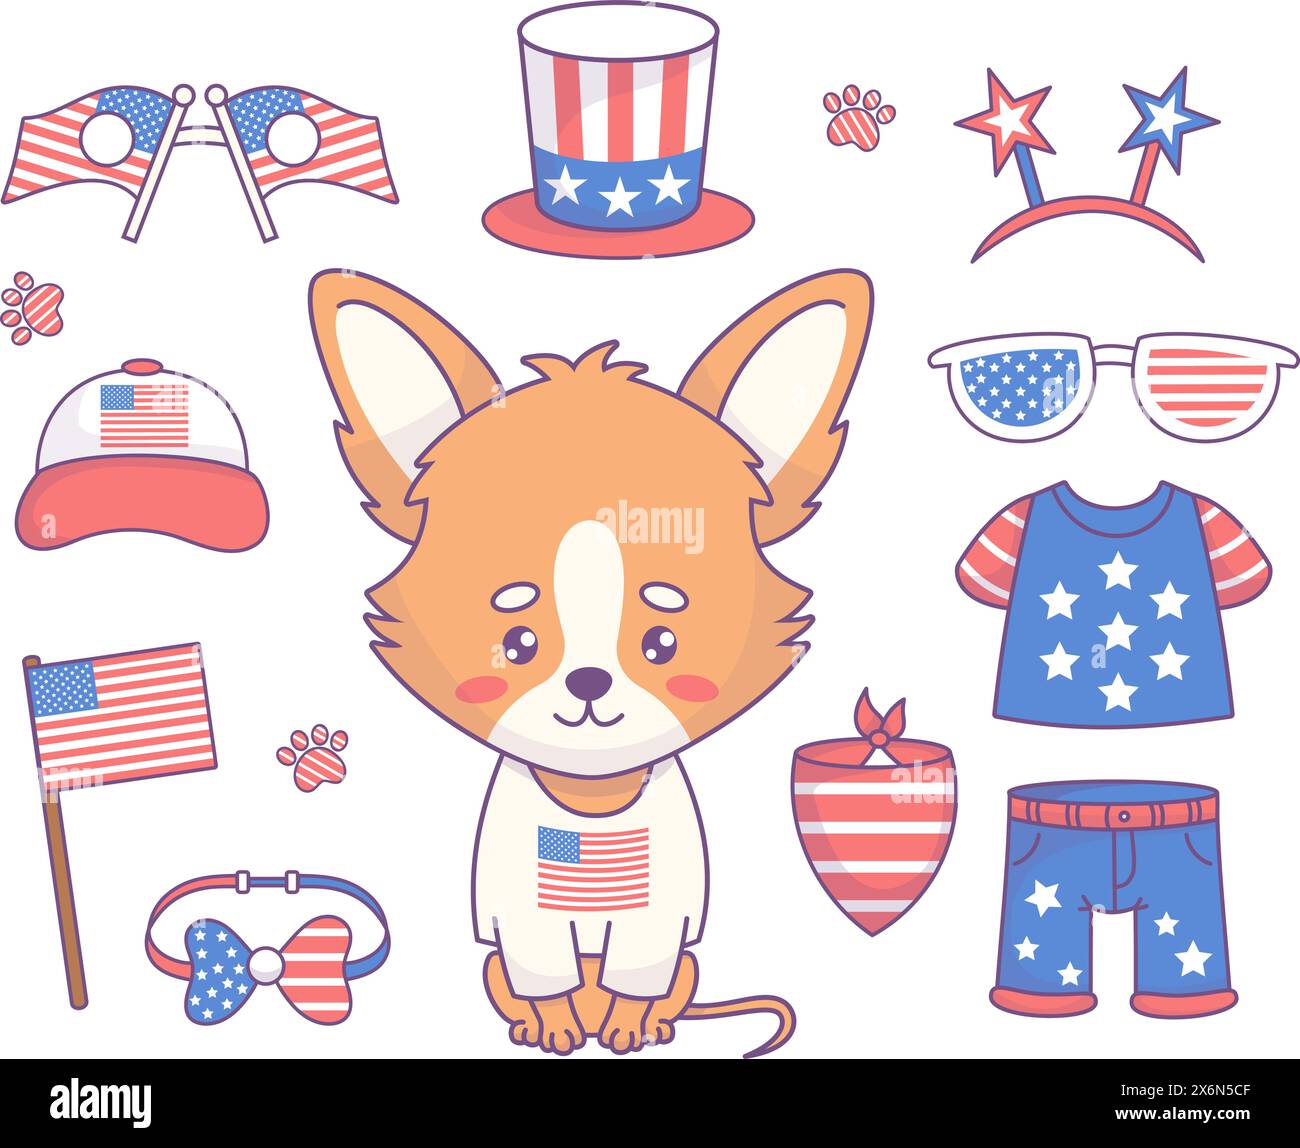 Independence Day holiday set. Cute festive dog chihuahua boy with patriotic clothes, accessories, party decorations in American flag colors. Cartoon f Stock Vector